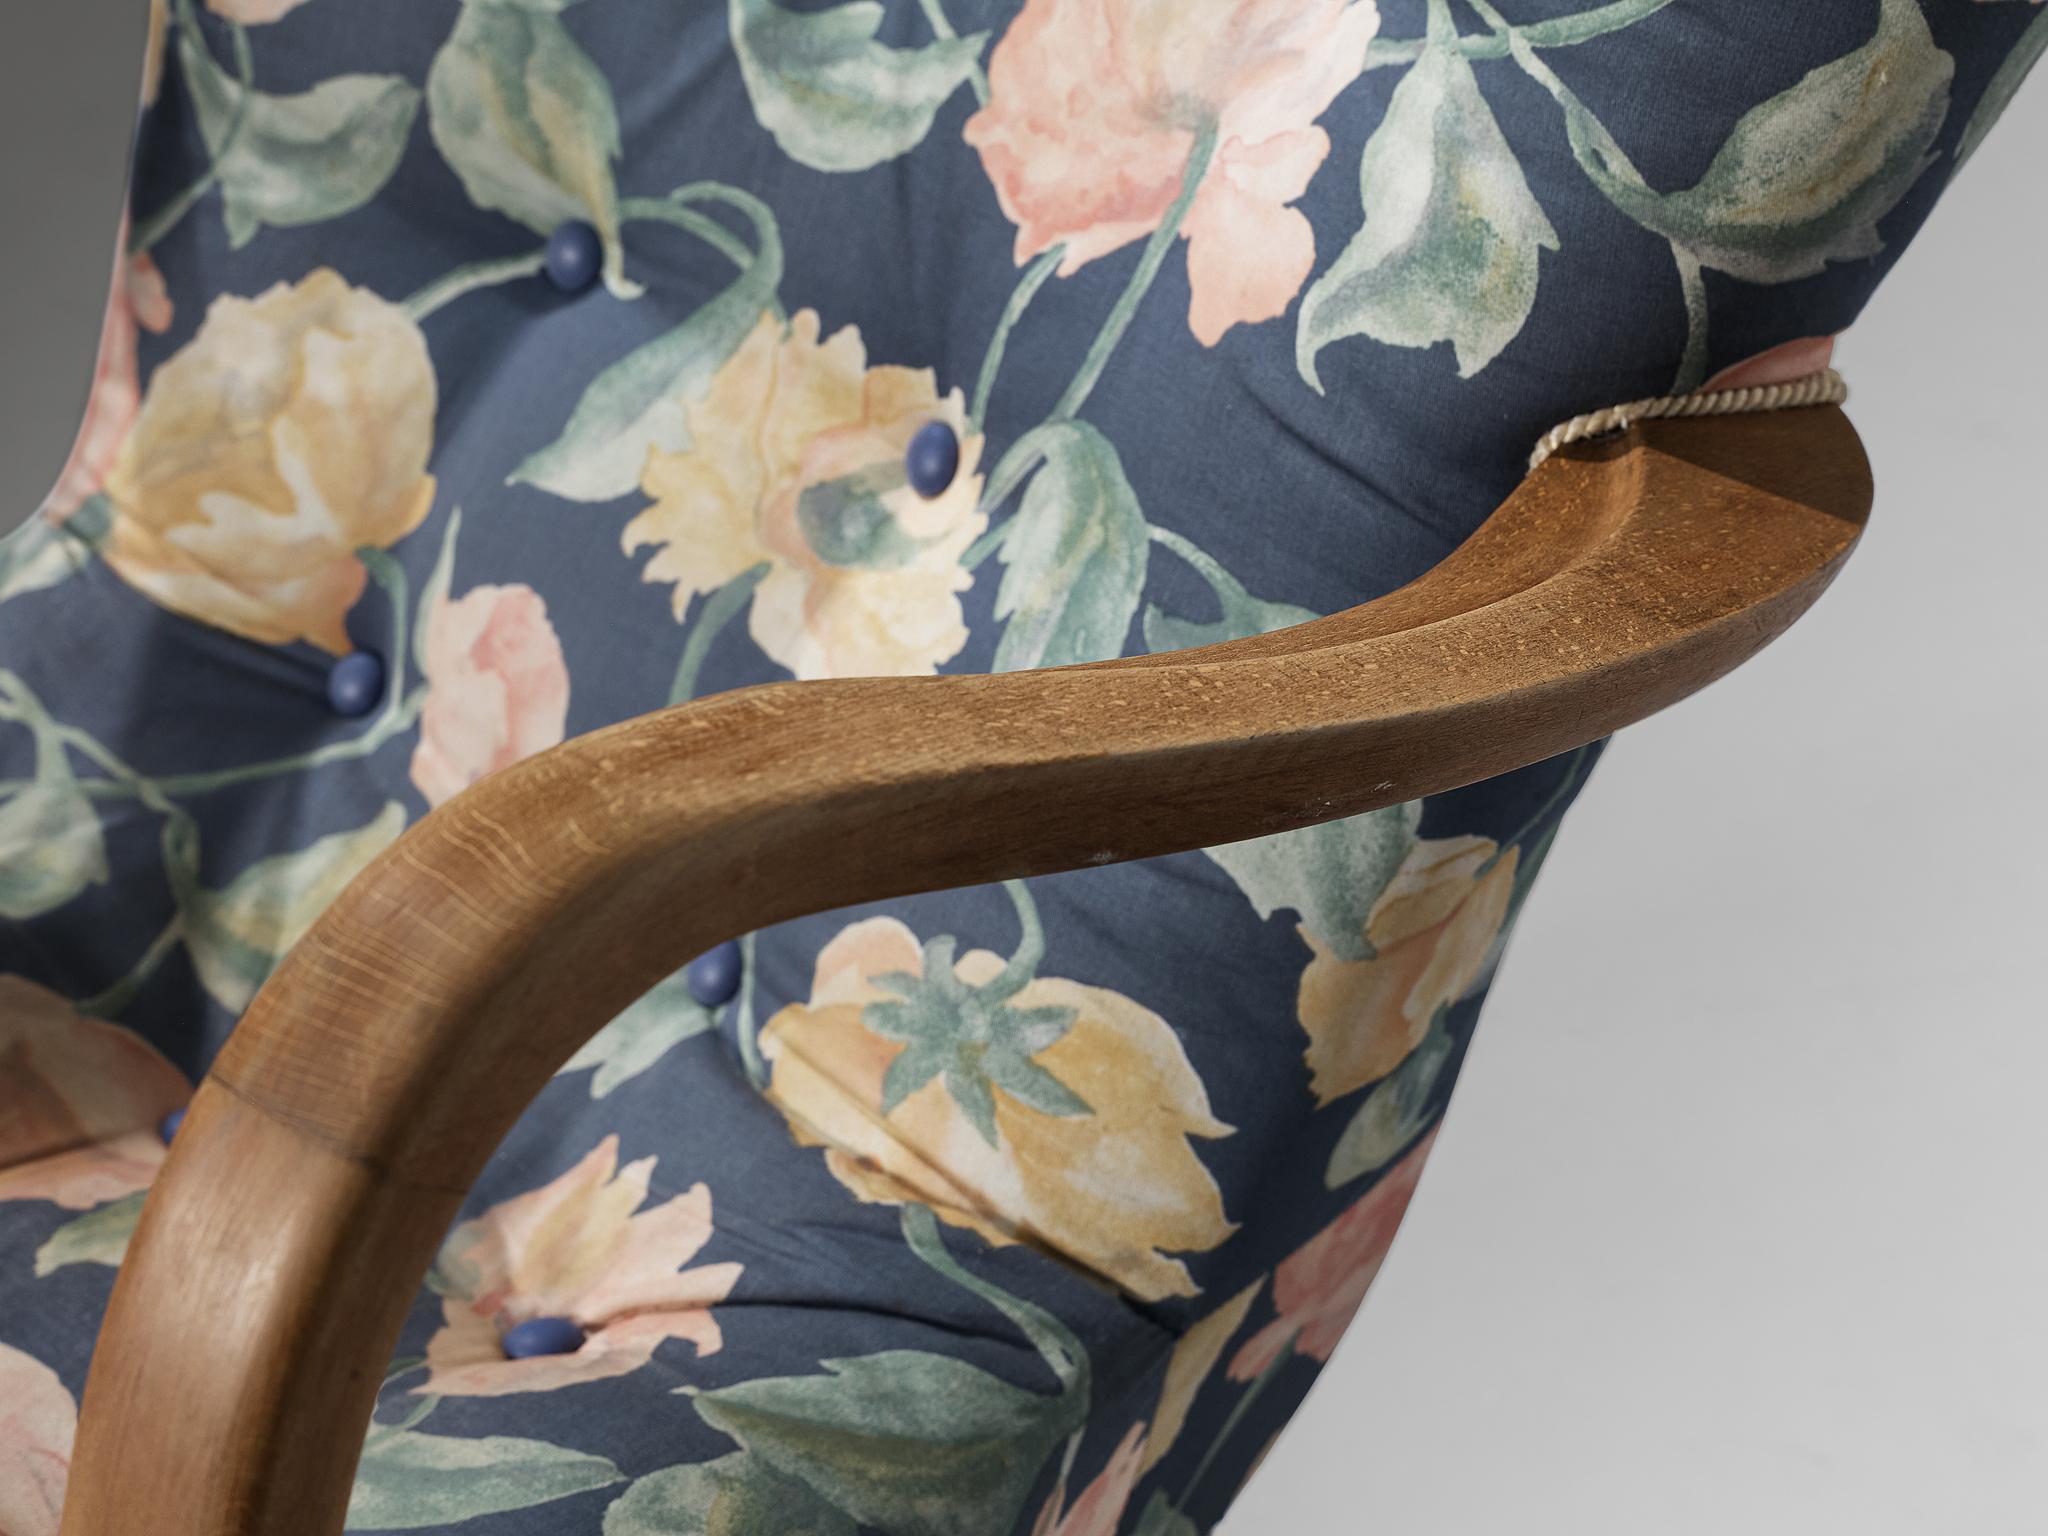 Danish Lounge Chair with Sculptural Armrests and Floral Upholstery